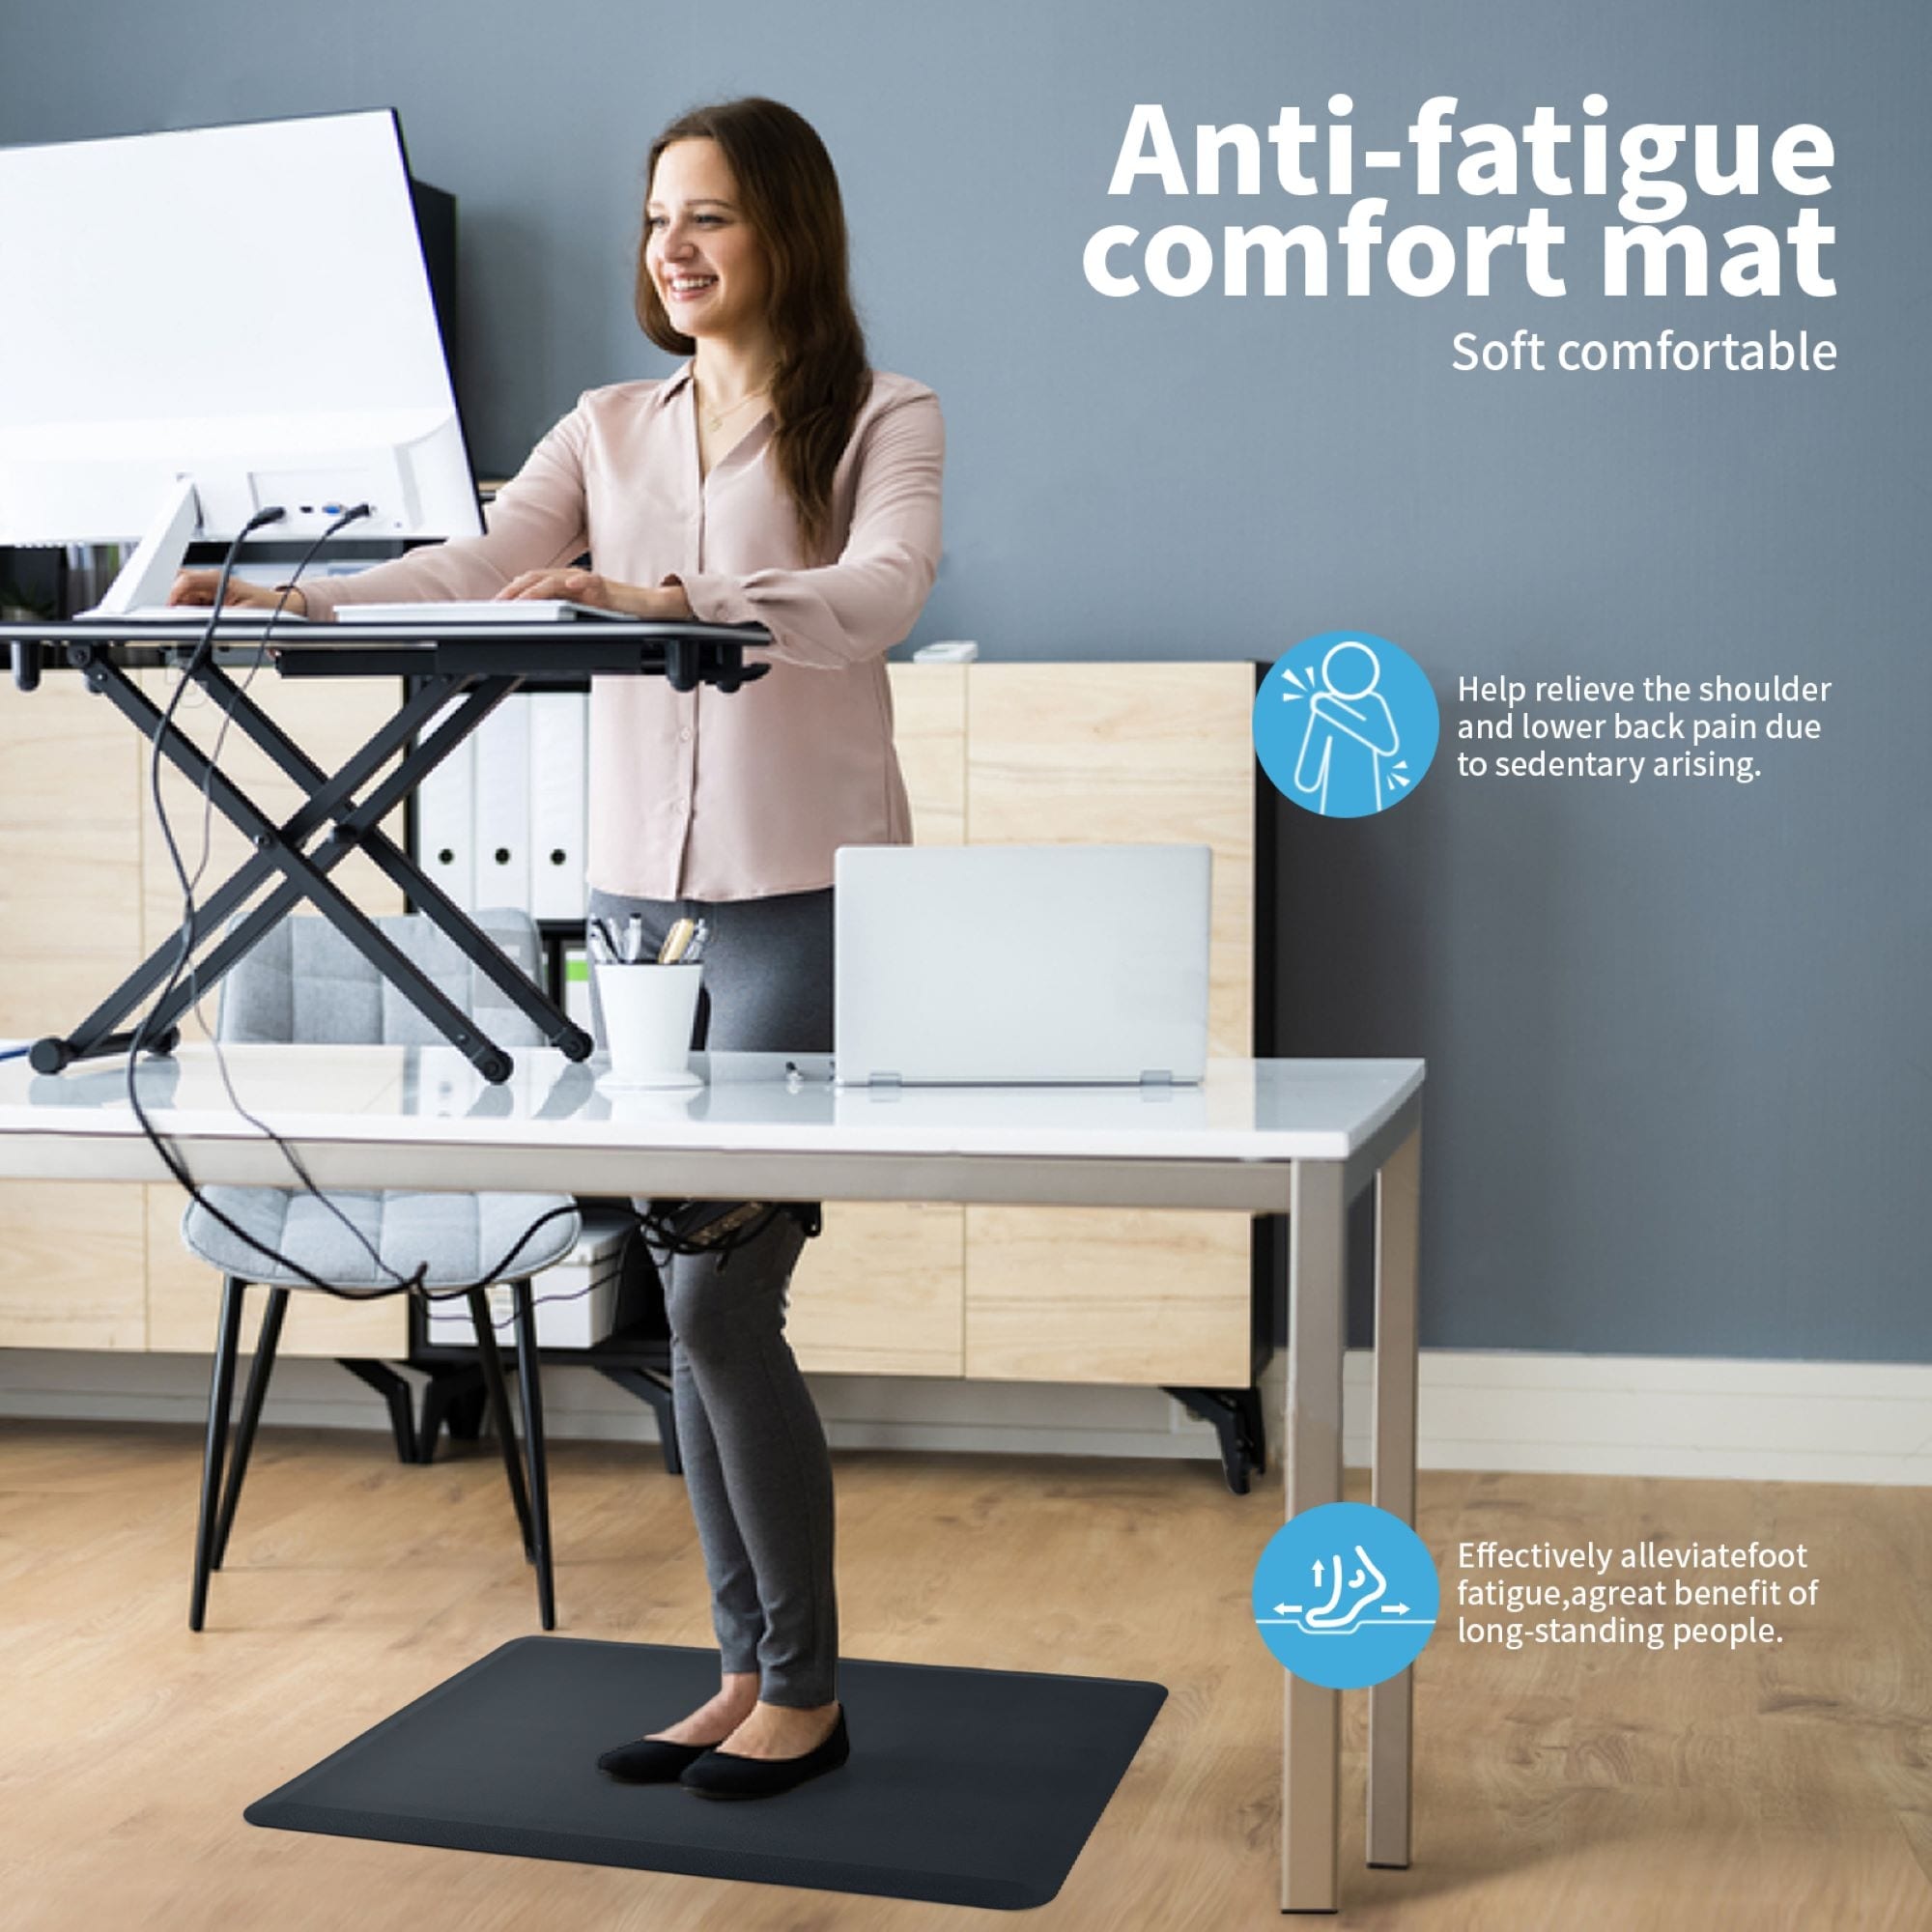  Standee Anti Fatigue Standing Mat, Padded Floor Mats for  Standing- Thick for Support and Comfort, 20 x 30 x 7/8 in. - Designed for  Office, Kitchen, Home or Cashier use- Ergonomic